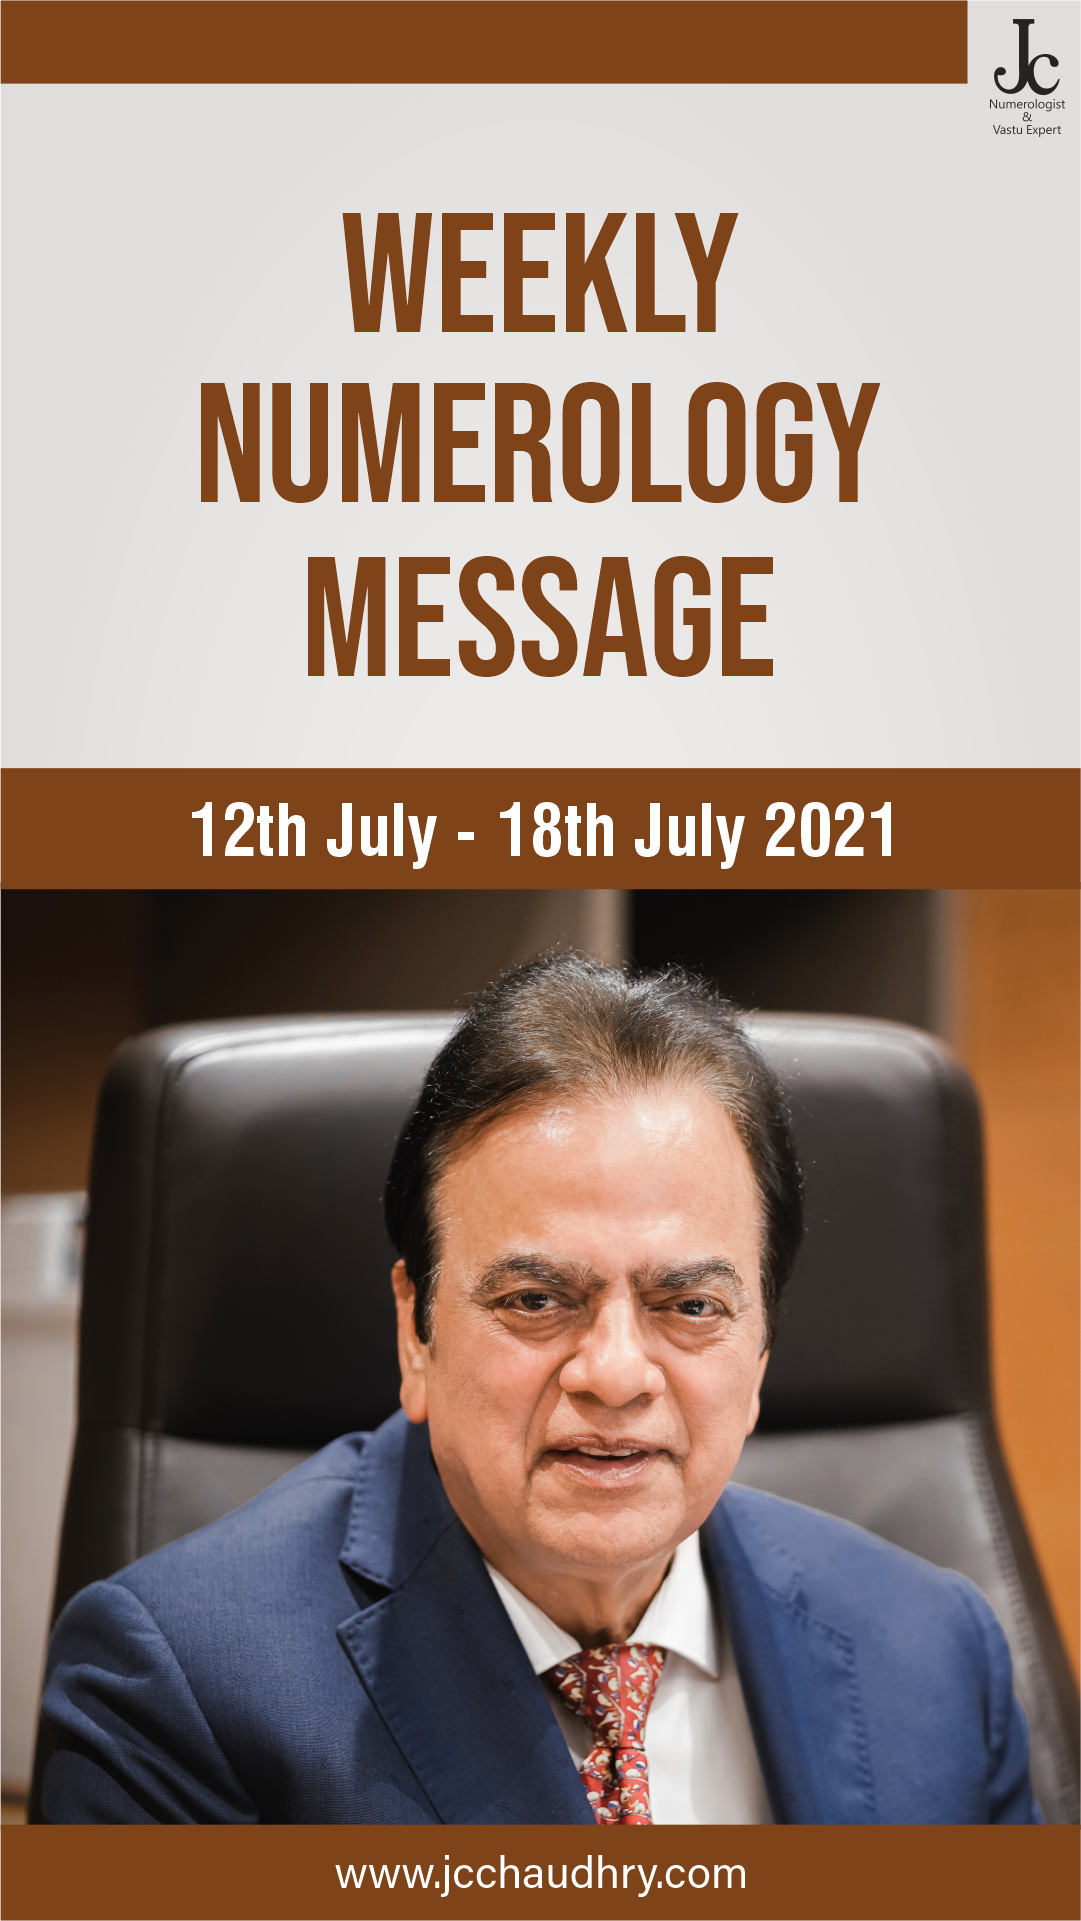 Weekly Numerology Predictions by J C Chaudhry from 12th July to 18th July, 2021